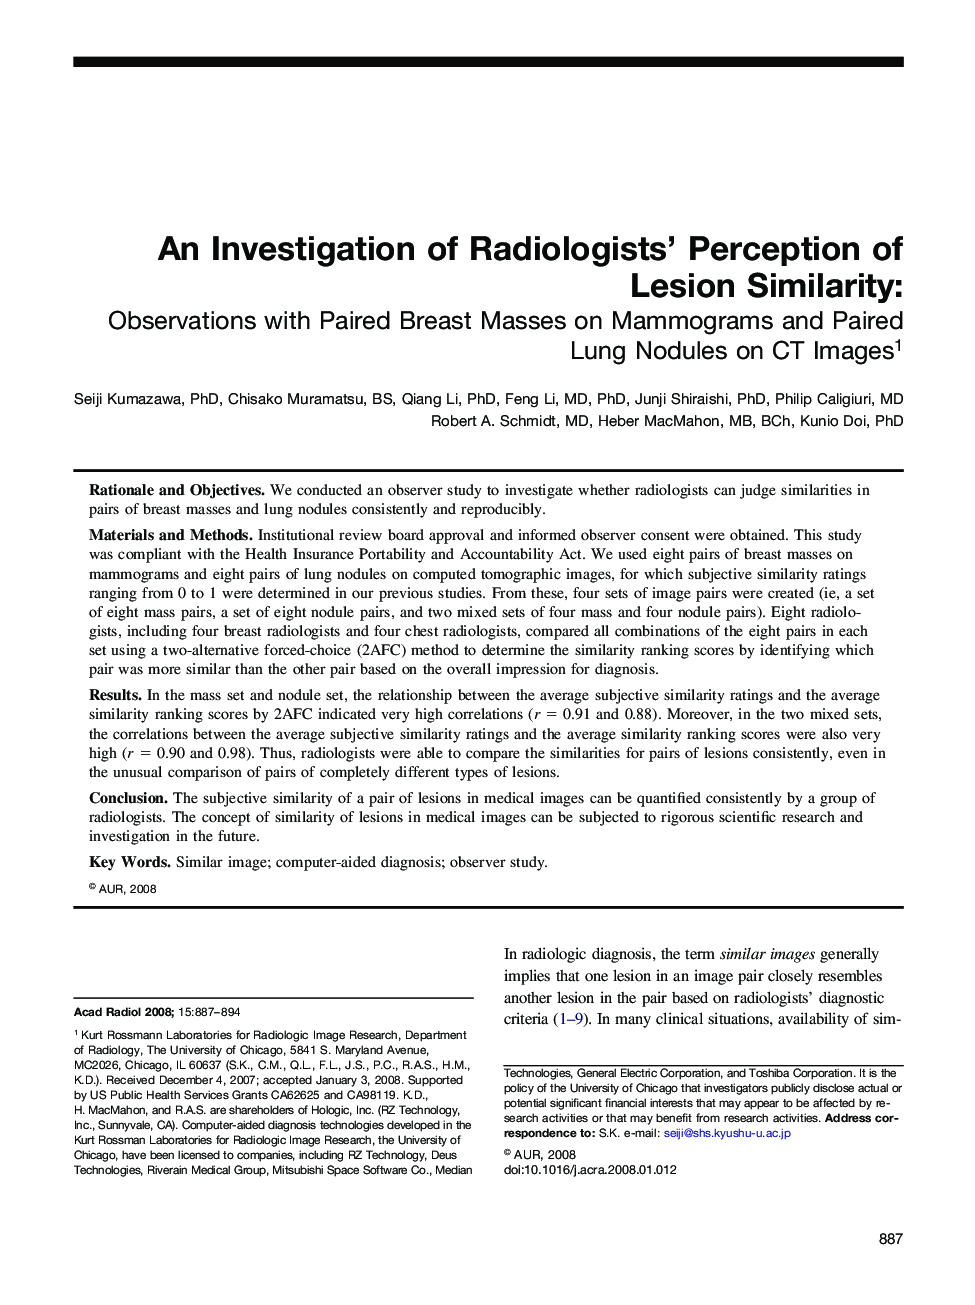 An Investigation of Radiologists' Perception of Lesion Similarity